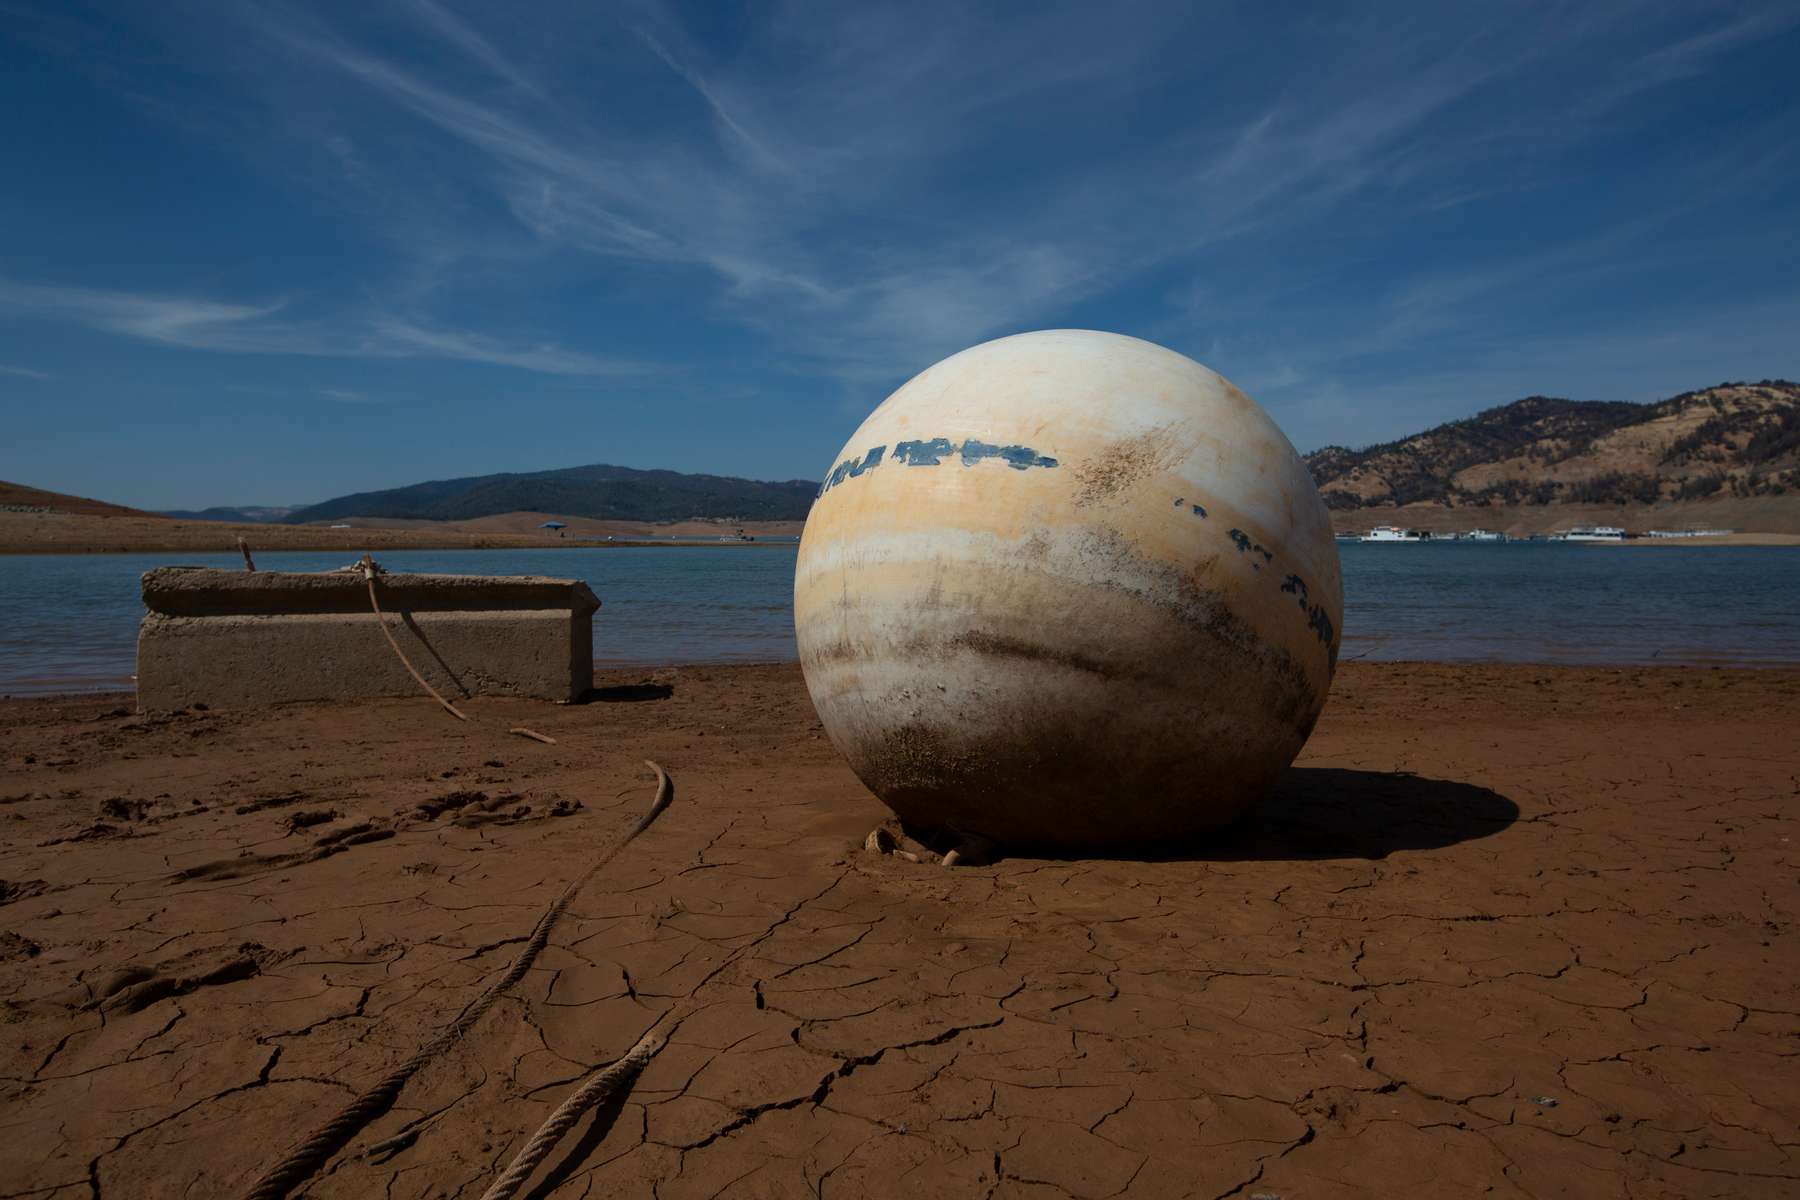 A buoy and its concrete anchor lay on the dry ground at Lake Oroville, California, U.S., June 16, 2021. Lake Oroville, the second largest reservoir in California is currently at 35% capacity. 